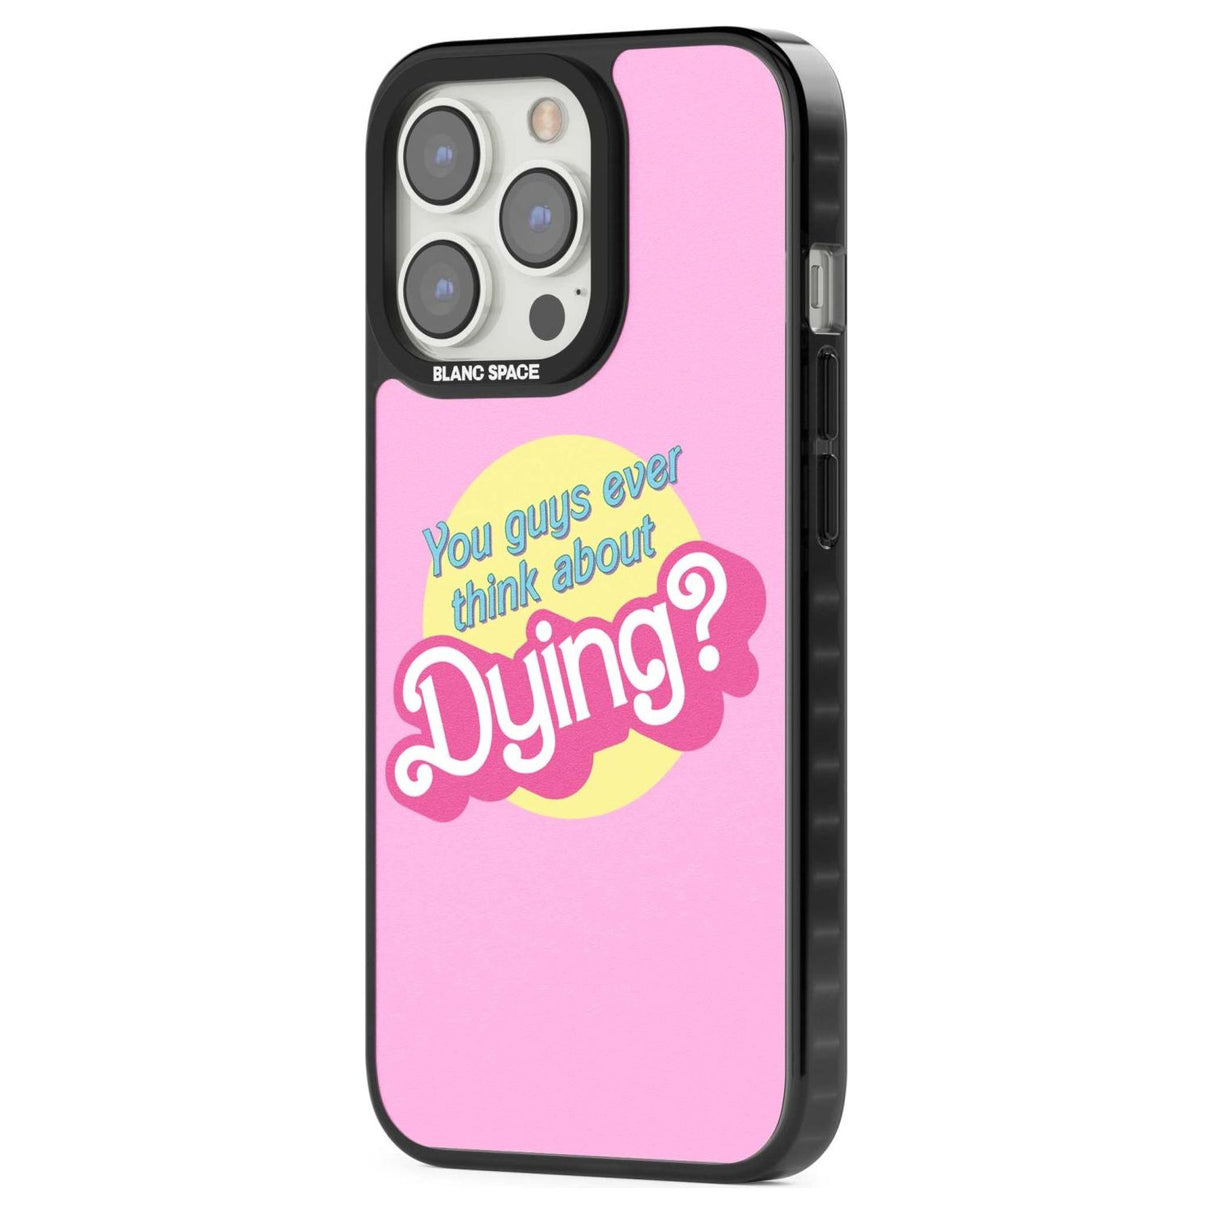 Ever Think About Dying? Phone Case iPhone 15 Pro Max / Black Impact Case,iPhone 15 Plus / Black Impact Case,iPhone 15 Pro / Black Impact Case,iPhone 15 / Black Impact Case,iPhone 15 Pro Max / Impact Case,iPhone 15 Plus / Impact Case,iPhone 15 Pro / Impact Case,iPhone 15 / Impact Case,iPhone 15 Pro Max / Magsafe Black Impact Case,iPhone 15 Plus / Magsafe Black Impact Case,iPhone 15 Pro / Magsafe Black Impact Case,iPhone 15 / Magsafe Black Impact Case,iPhone 14 Pro Max / Black Impact Case,iPhone 14 Plus / Bla